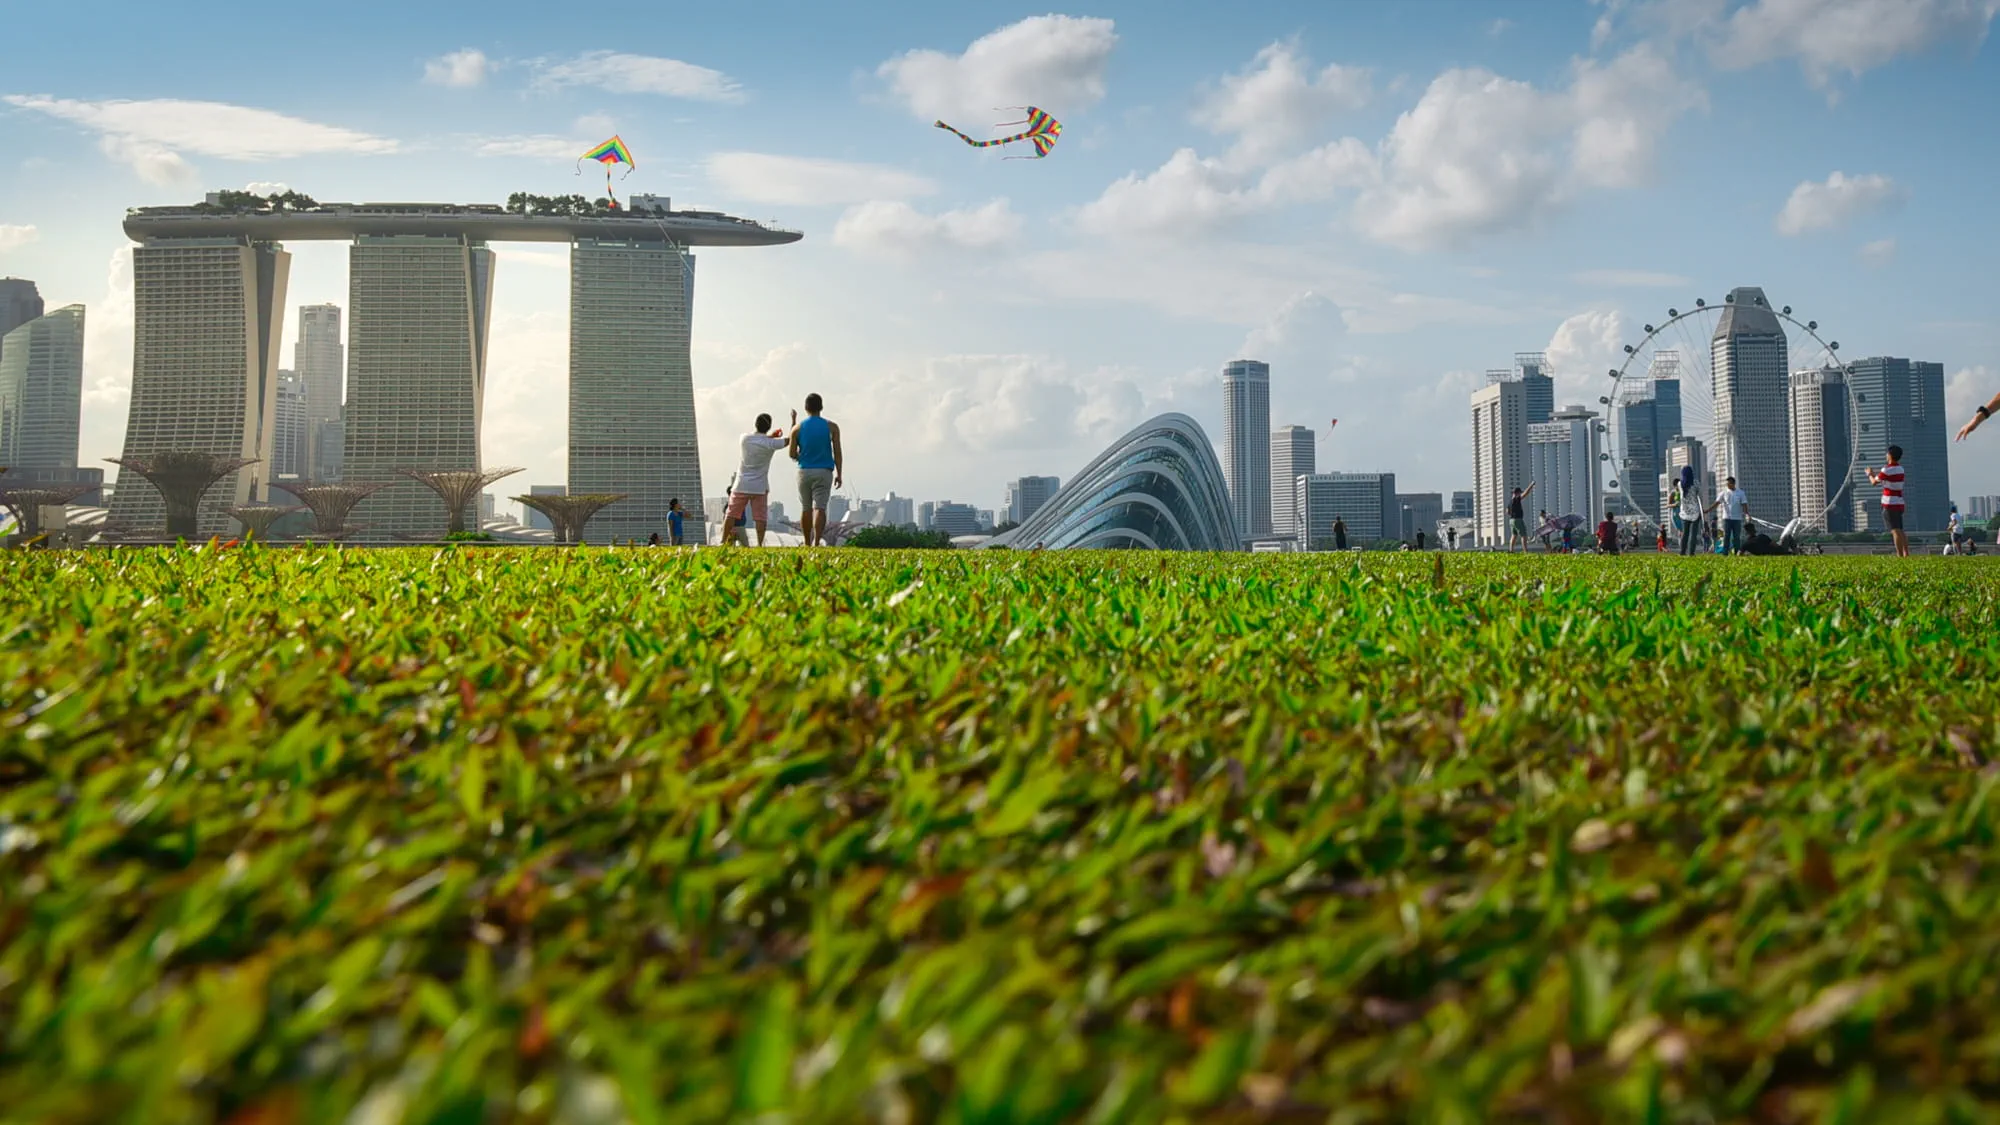 Adults and children playing with a kite in the green parks surrounding Marina Bay area in Singapore on a sunny day